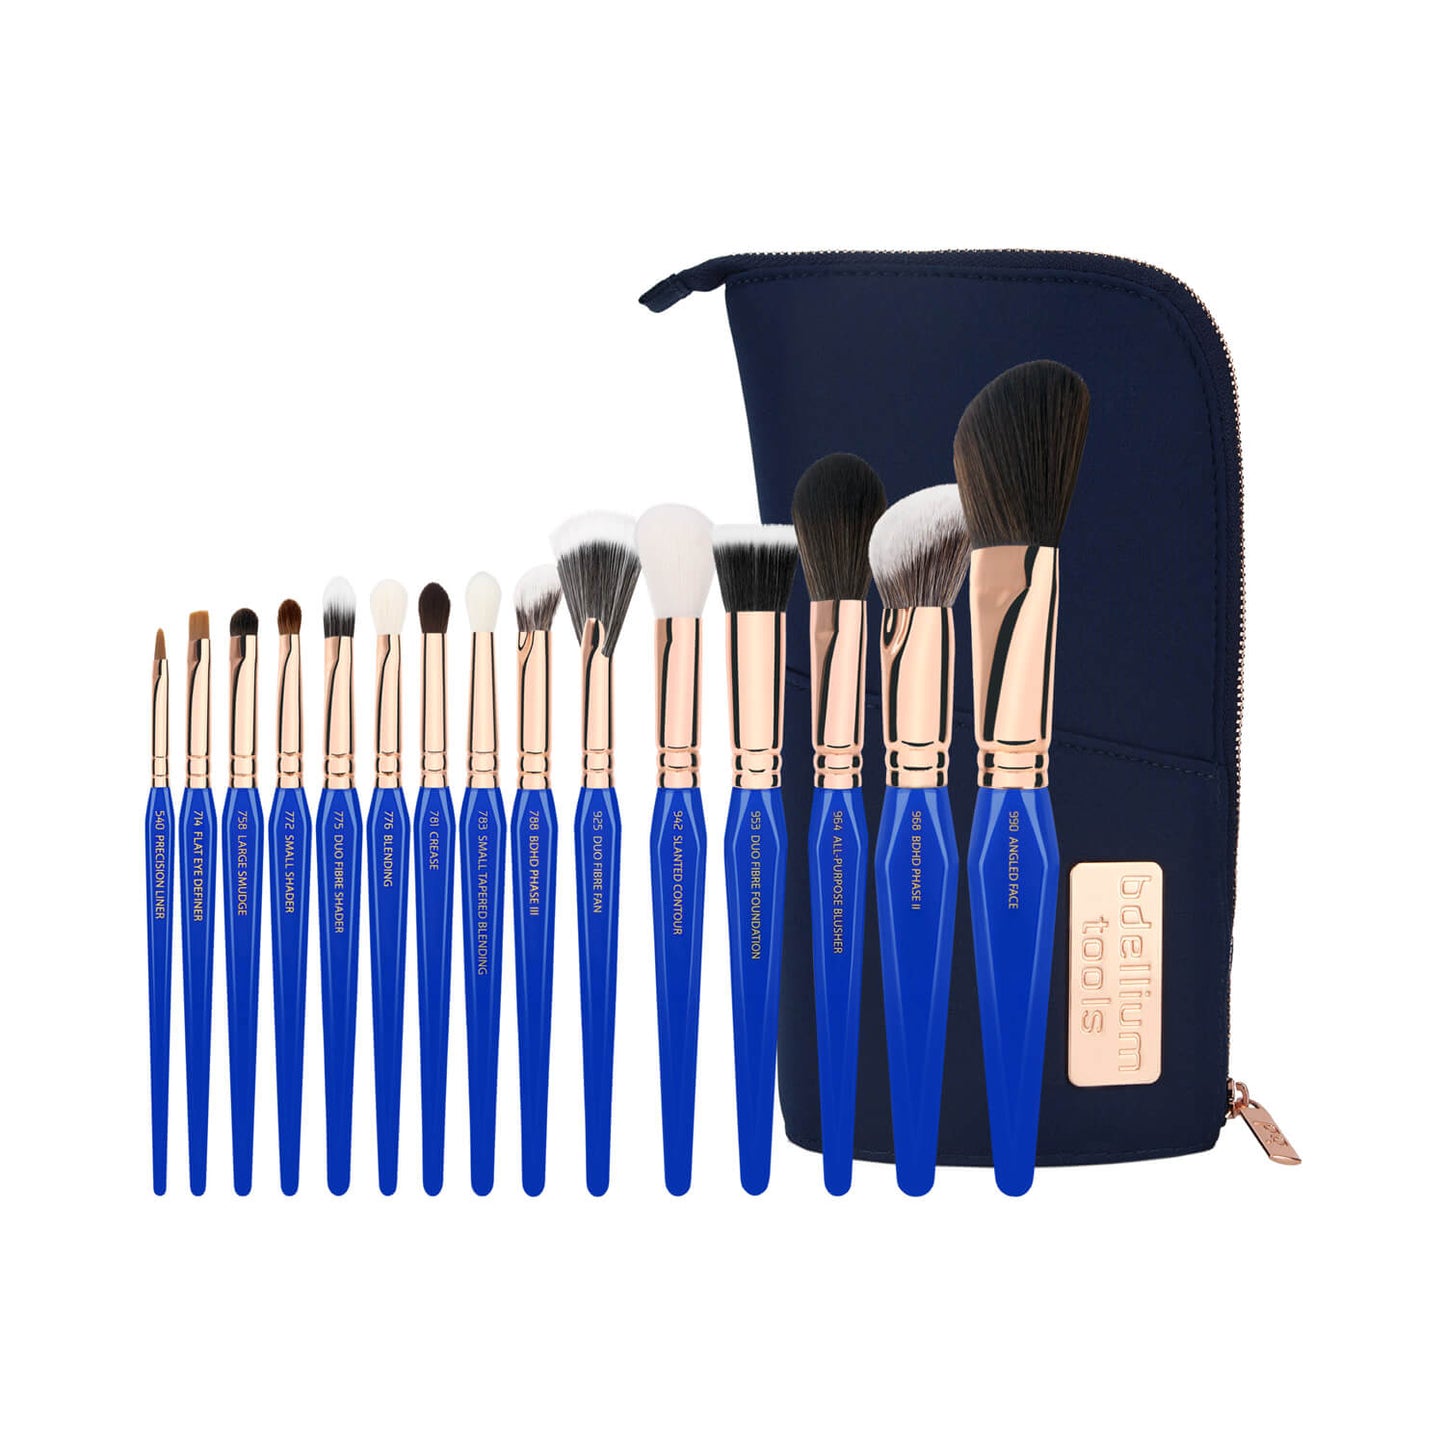 Bdellium Tools Golden Triangle Phase III Complete 15pc Brush Set With Pouch